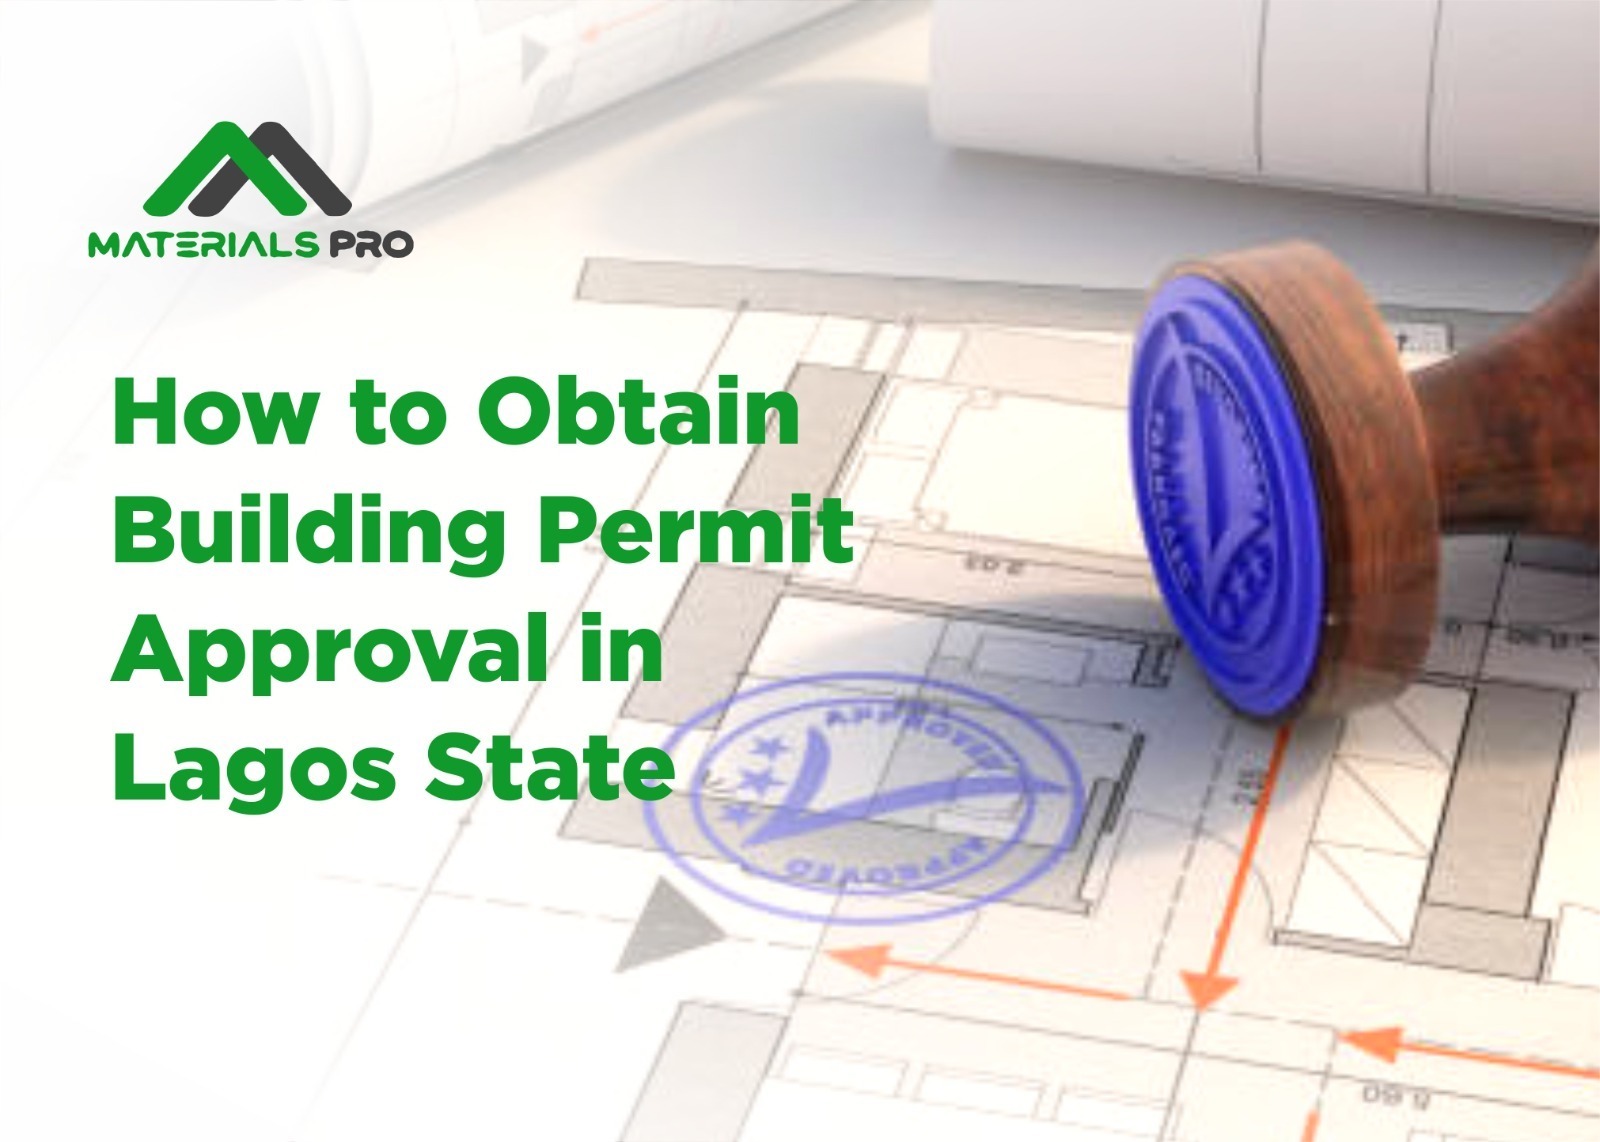 How to Obtain Building Permit Approval in Lagos State